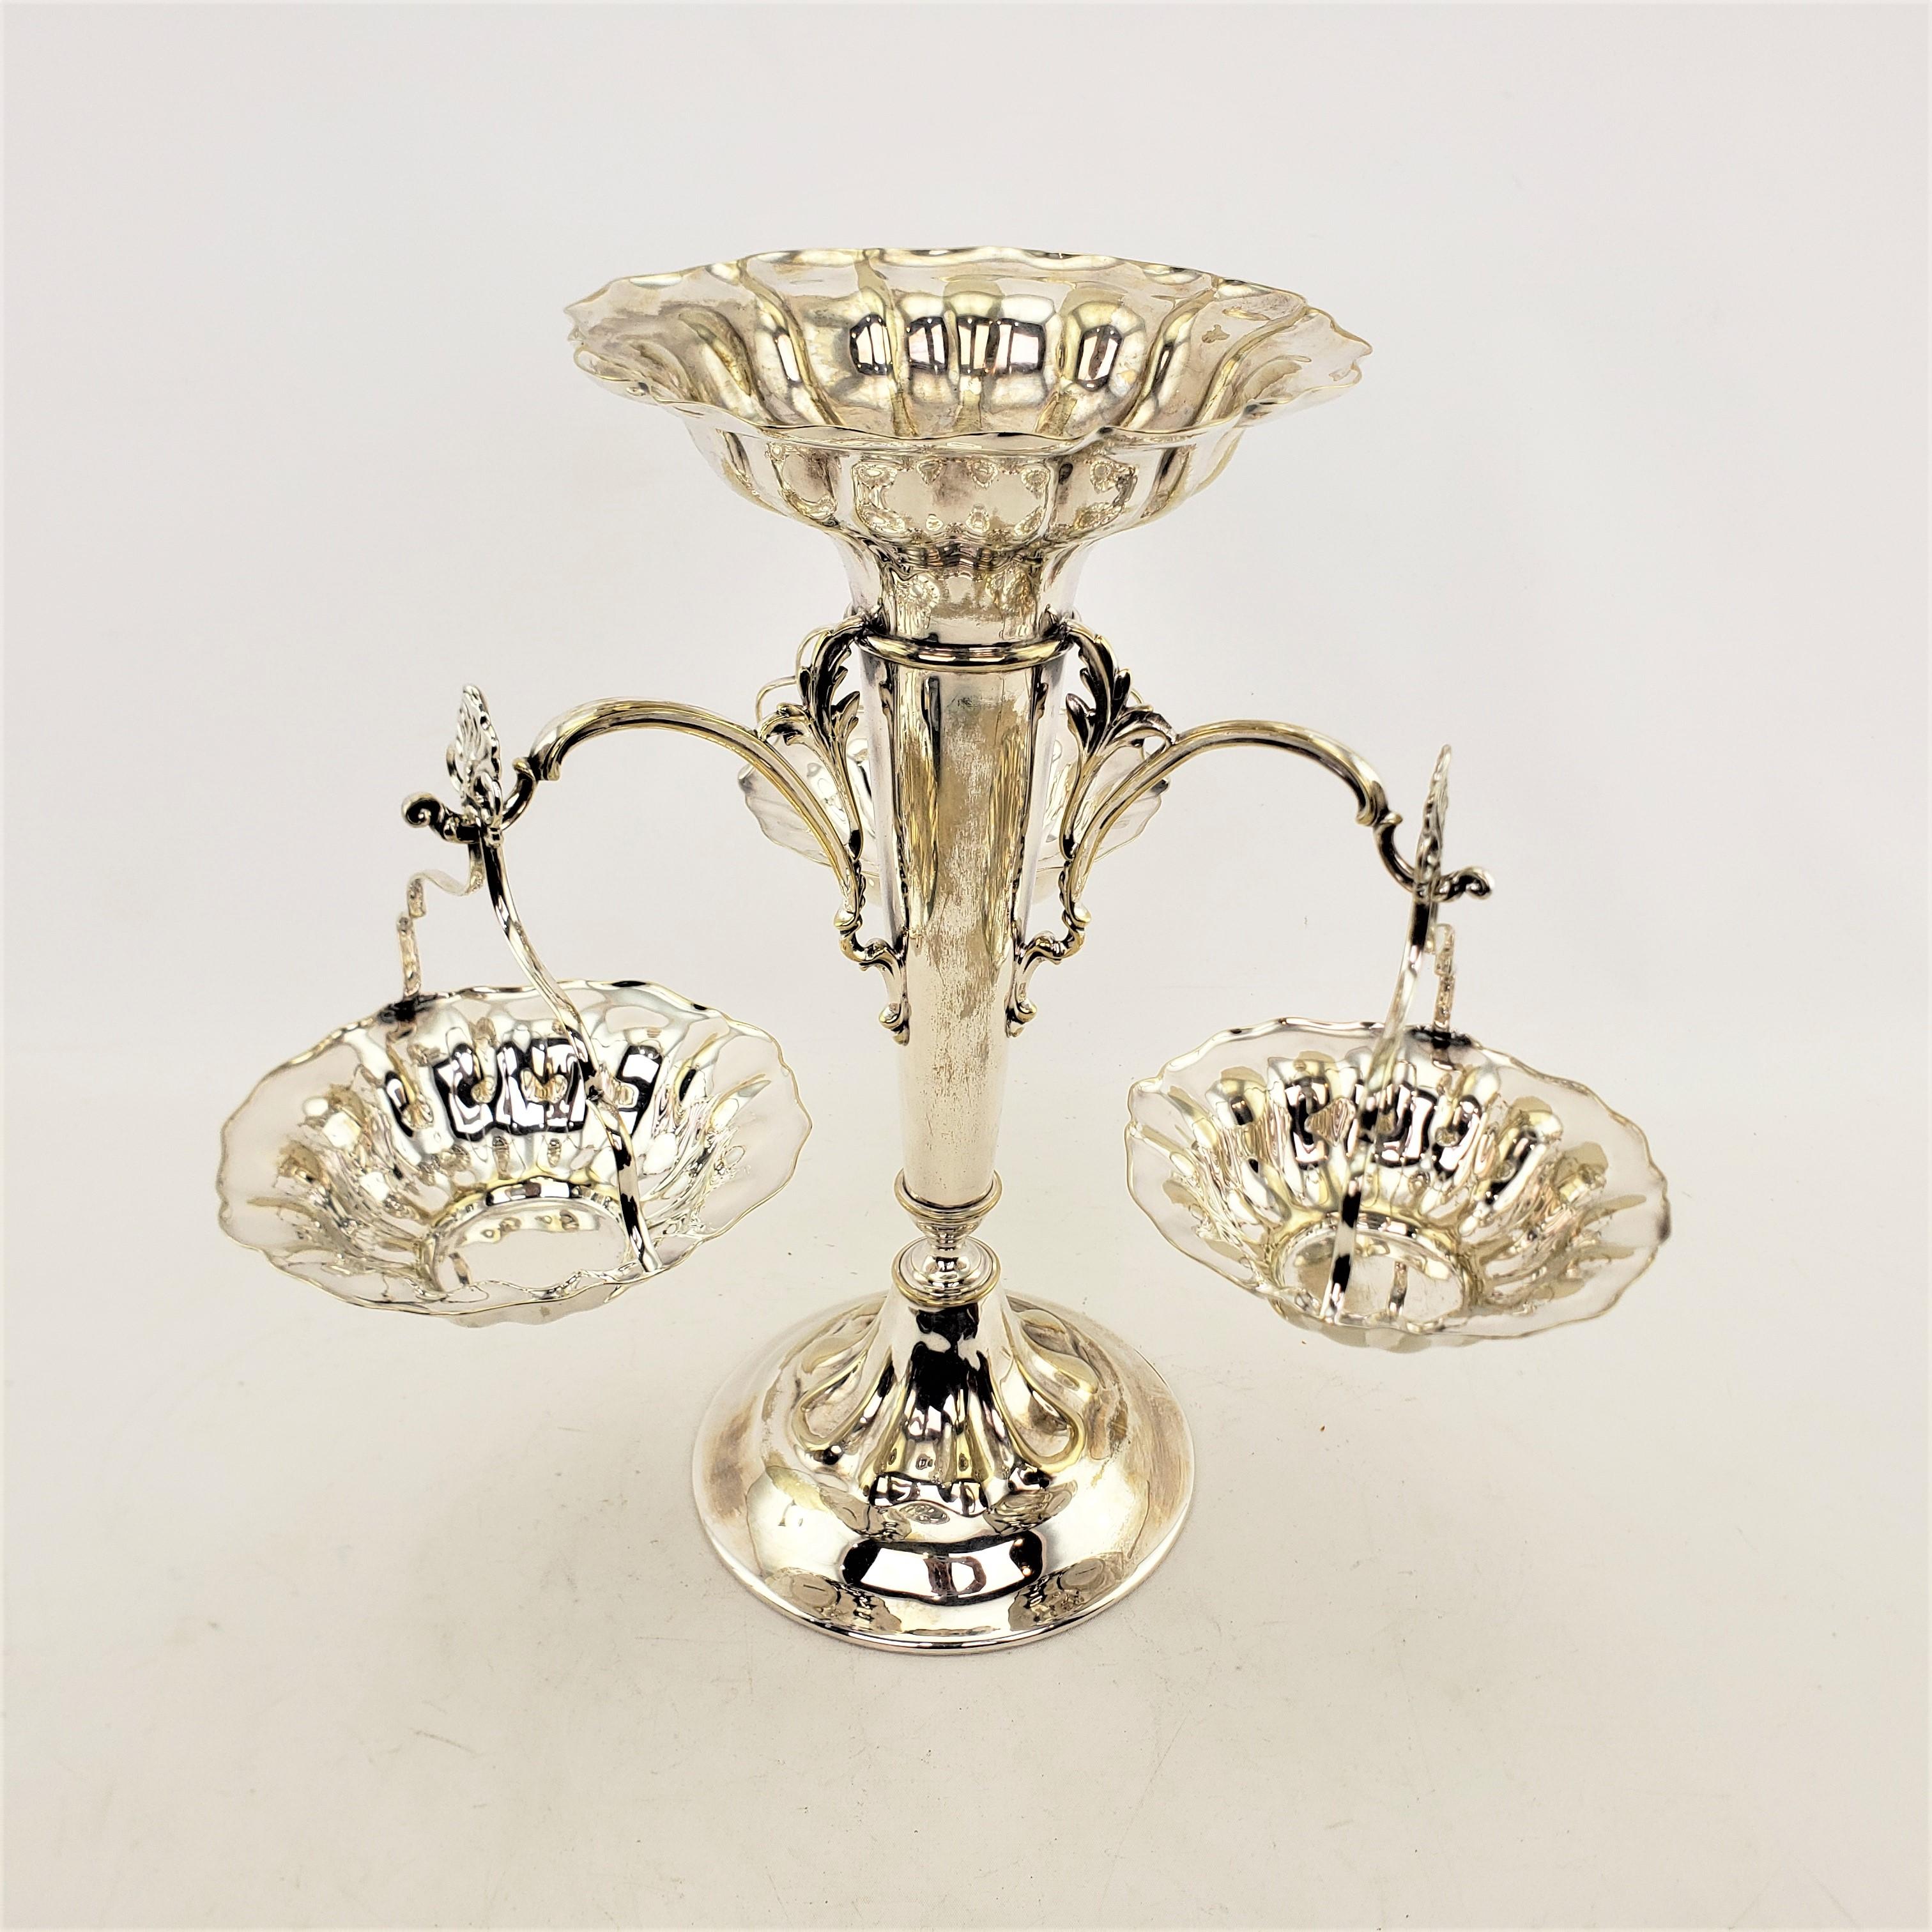 Antique English Elkington Silver Plated Epergne or Centerpiece with Side Baskets For Sale 1